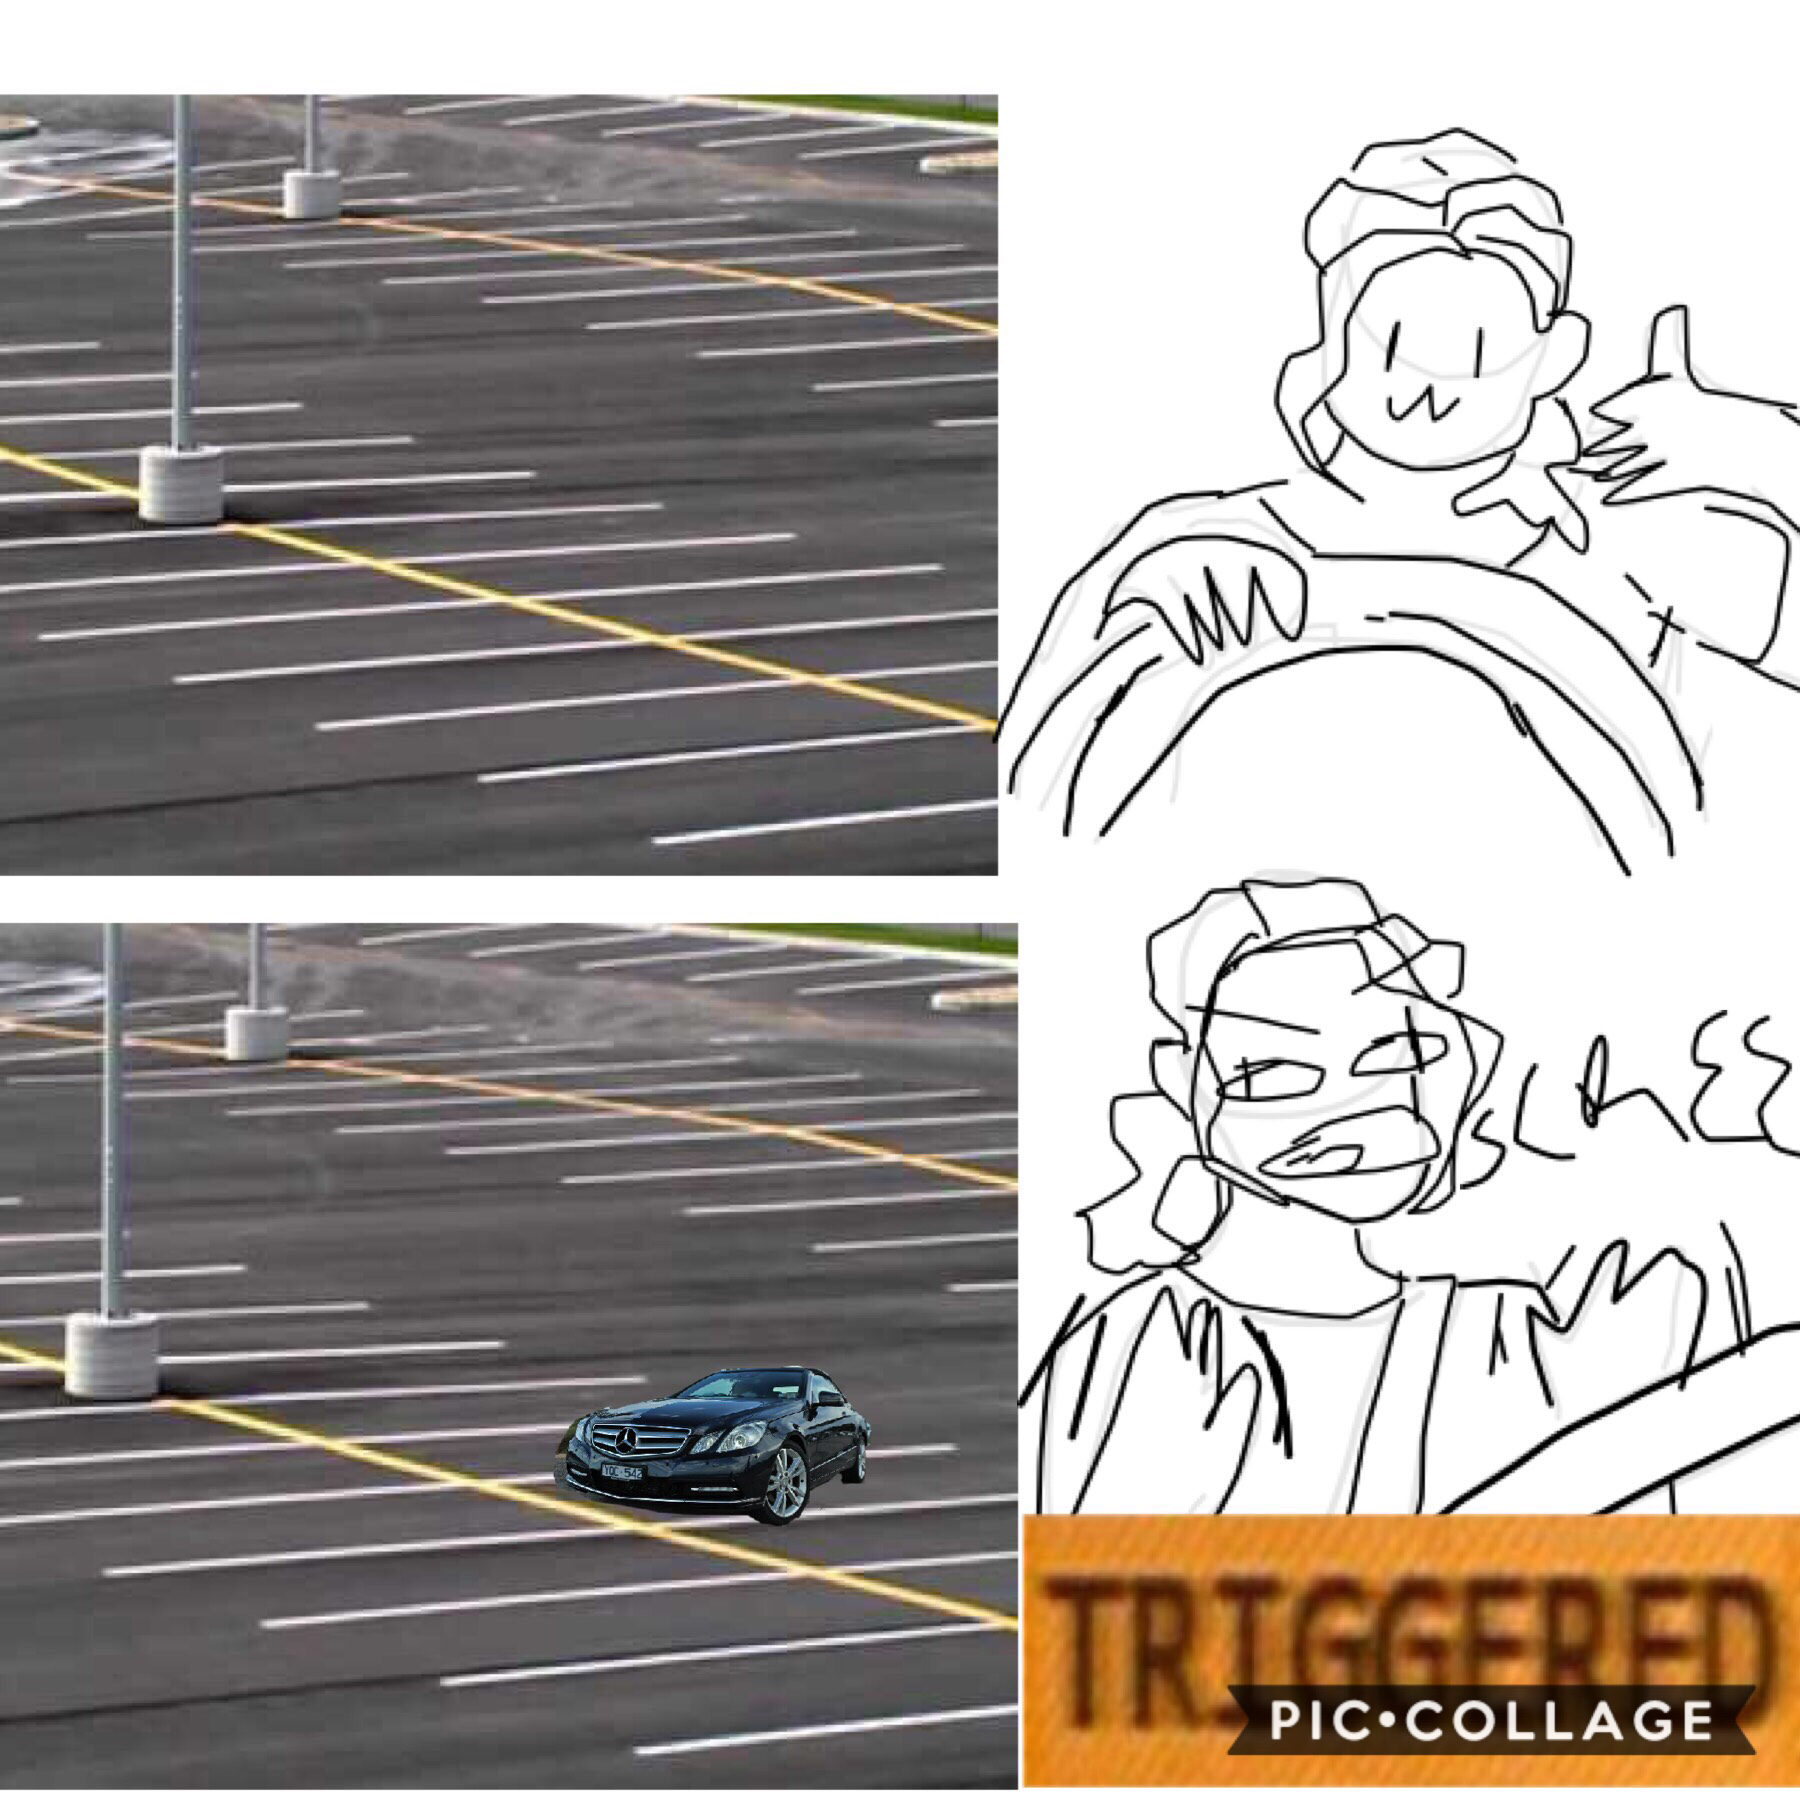 did I do this meme right (tap)

Driving in parking lots with cars in them gives me extreme anxiety, hence this. 